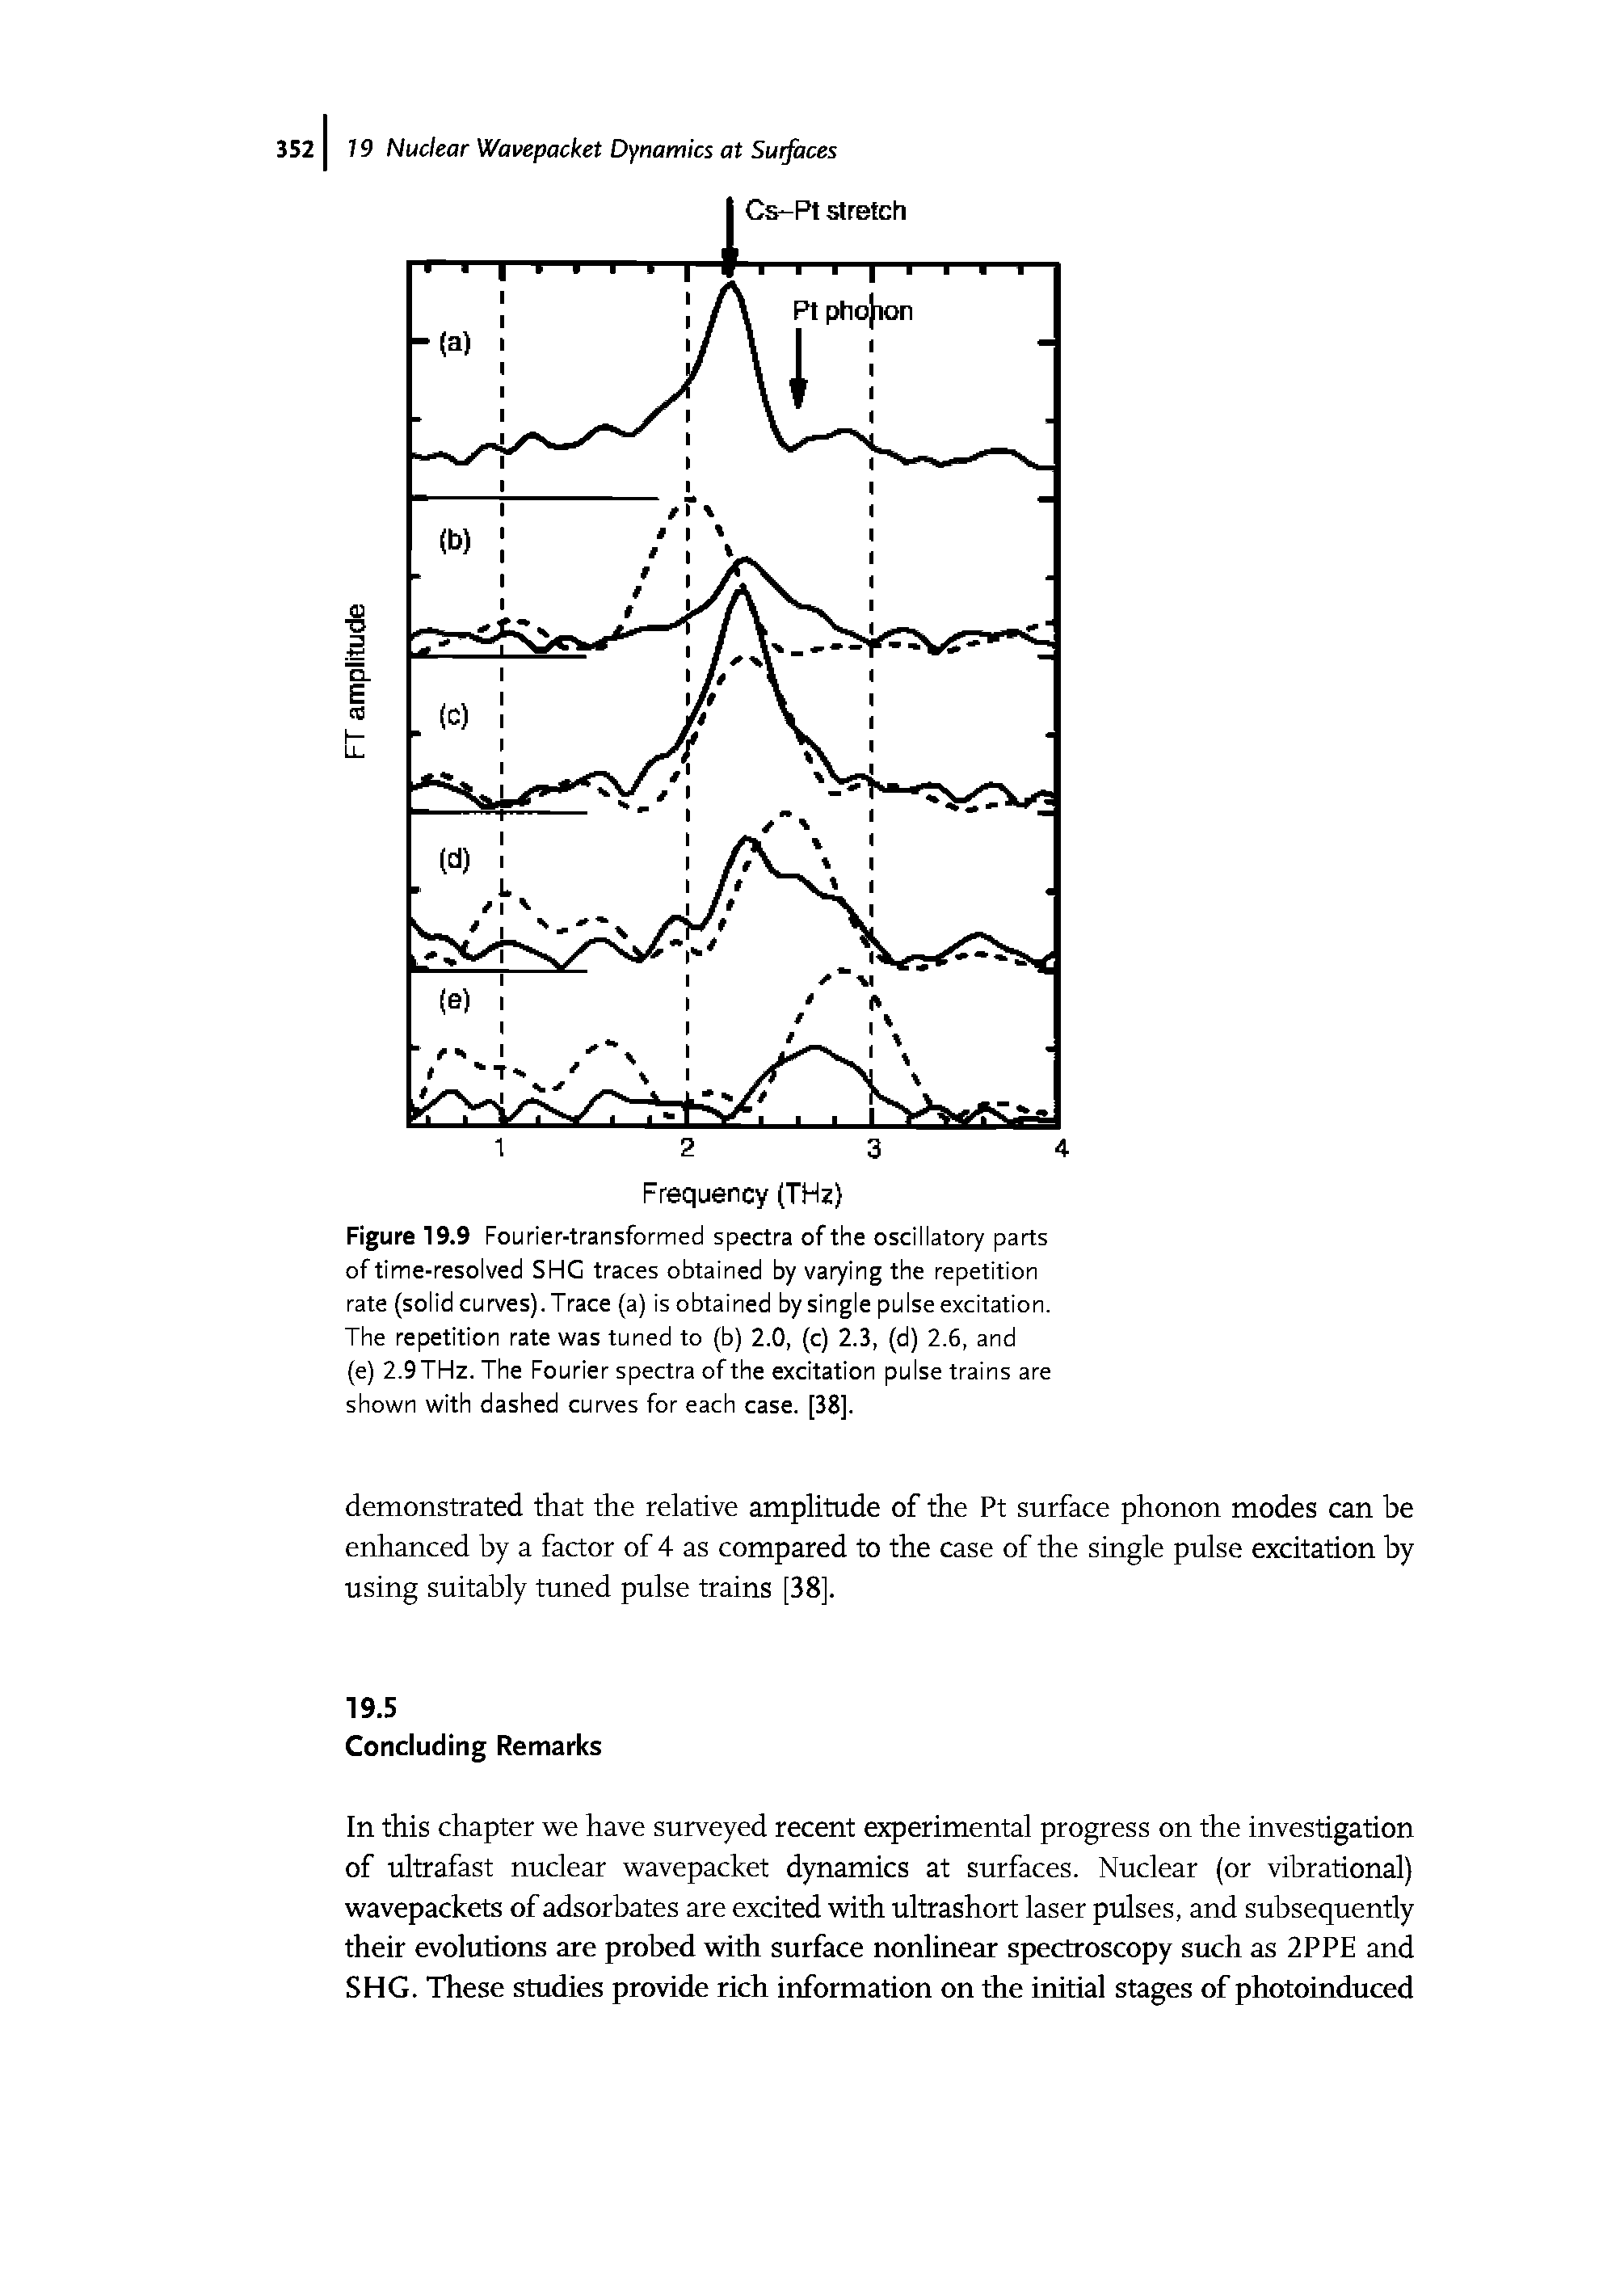 Figure 19.9 Fourier-transformed spectra of the oscillatory parts of time-resolved SHC traces obtained by varying the repetition rate (solid curves). Trace (a) is obtained by single pulse excitation. The repetition rate was tuned to (b) 2.0, (c) 2.3, (d) 2.6, and (e) 2.9THz. The Fourier spectra of the excitation pulse trains are shown with dashed curves for each case. [38].